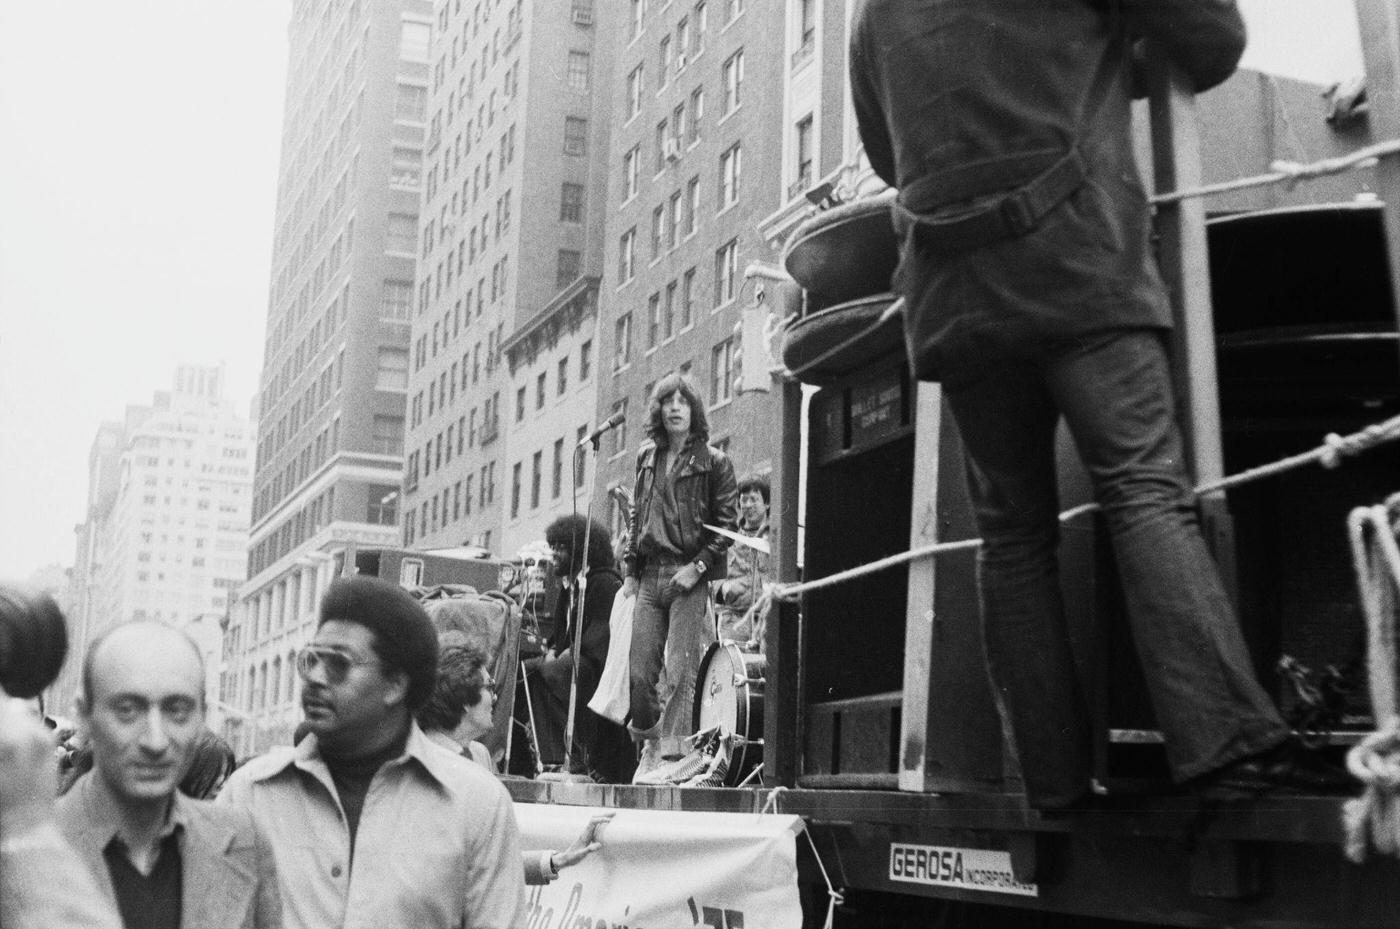 Mick Jagger and Billy Preston perform on a flatbed truck on Fifth Avenue, New York City, 1975.